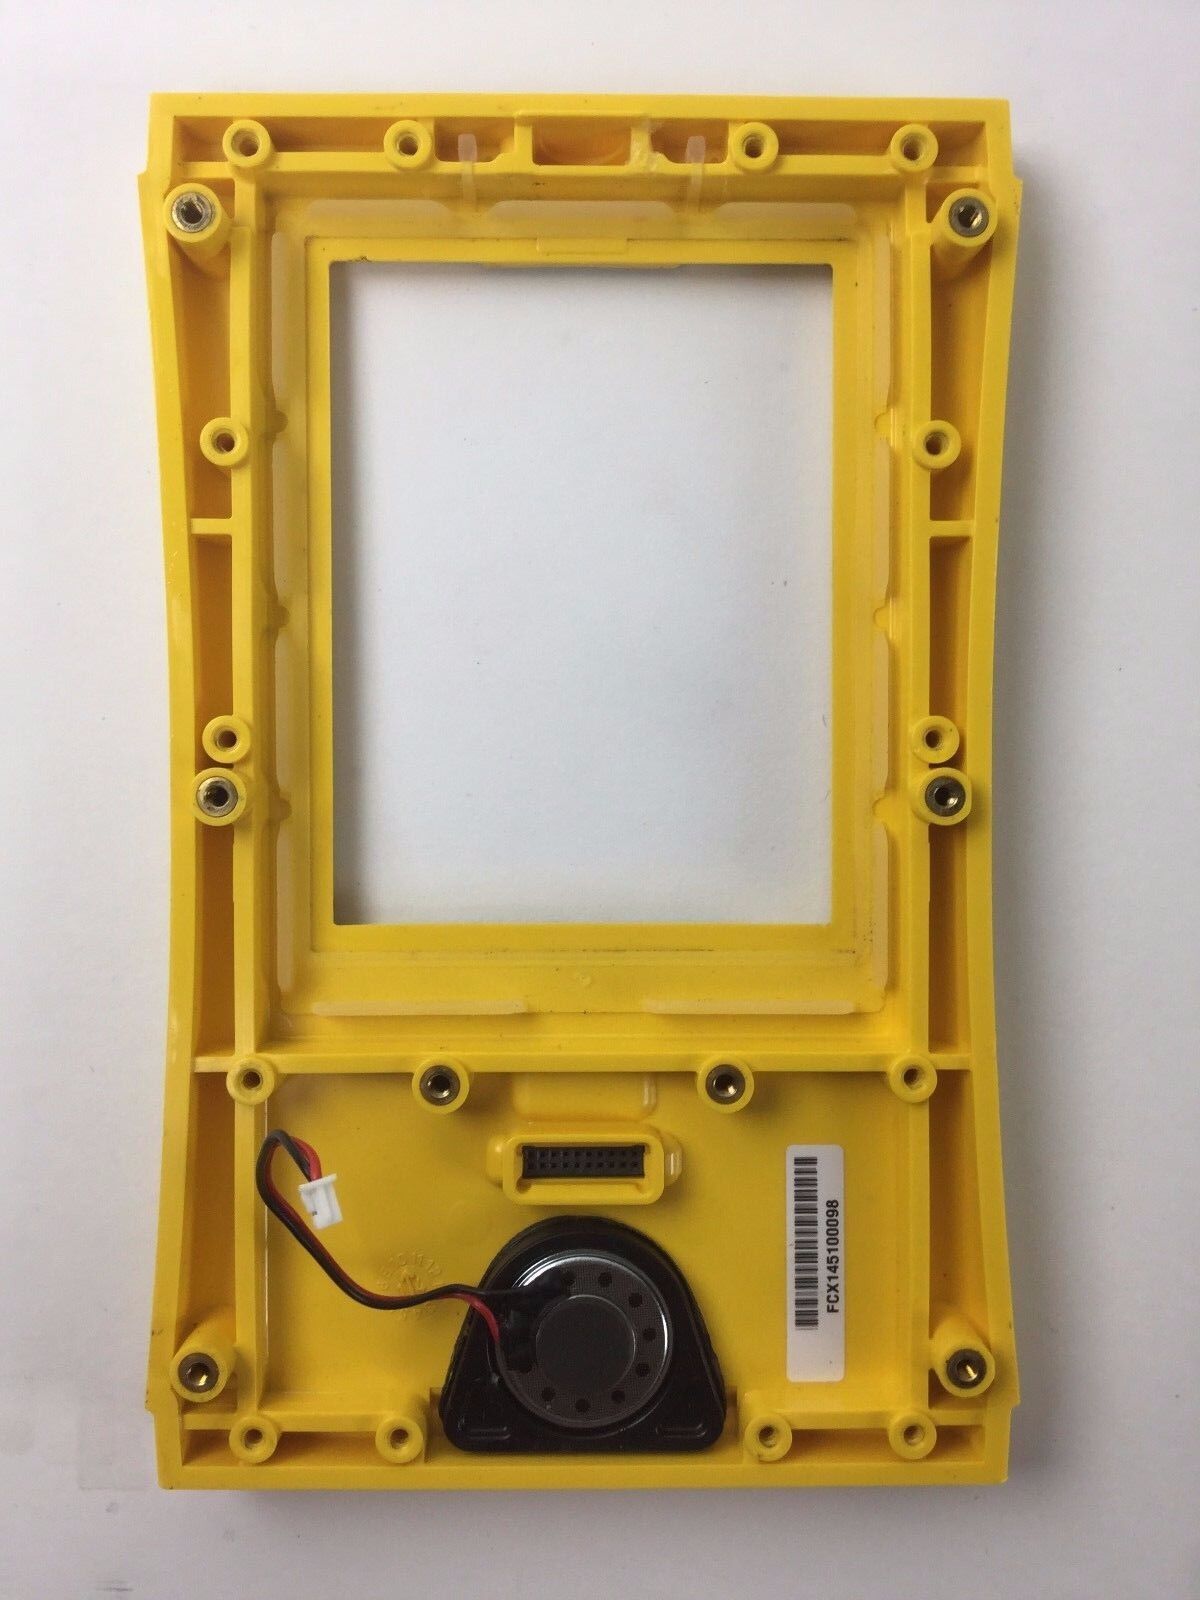 Trimble Nomad N324 Front Cover with Key Pad (1 key missing) -Listing for one cov